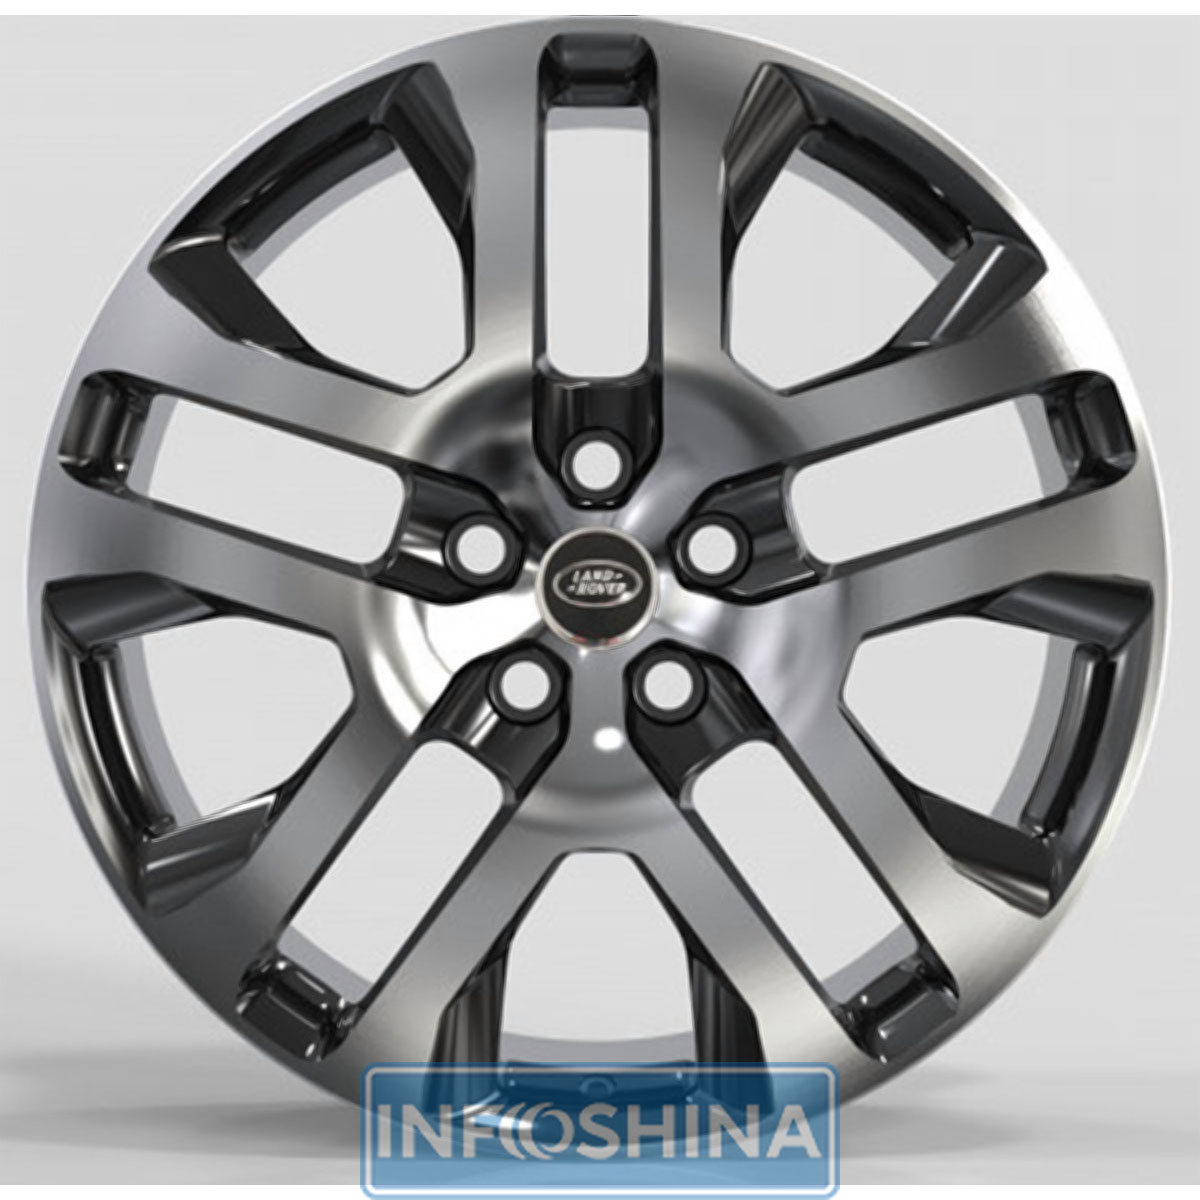 Купити диски Replica Forged LR2241 Gloss Black With Machined Face R20 W8.5 PCD5x120 ET41.5 DIA72.6